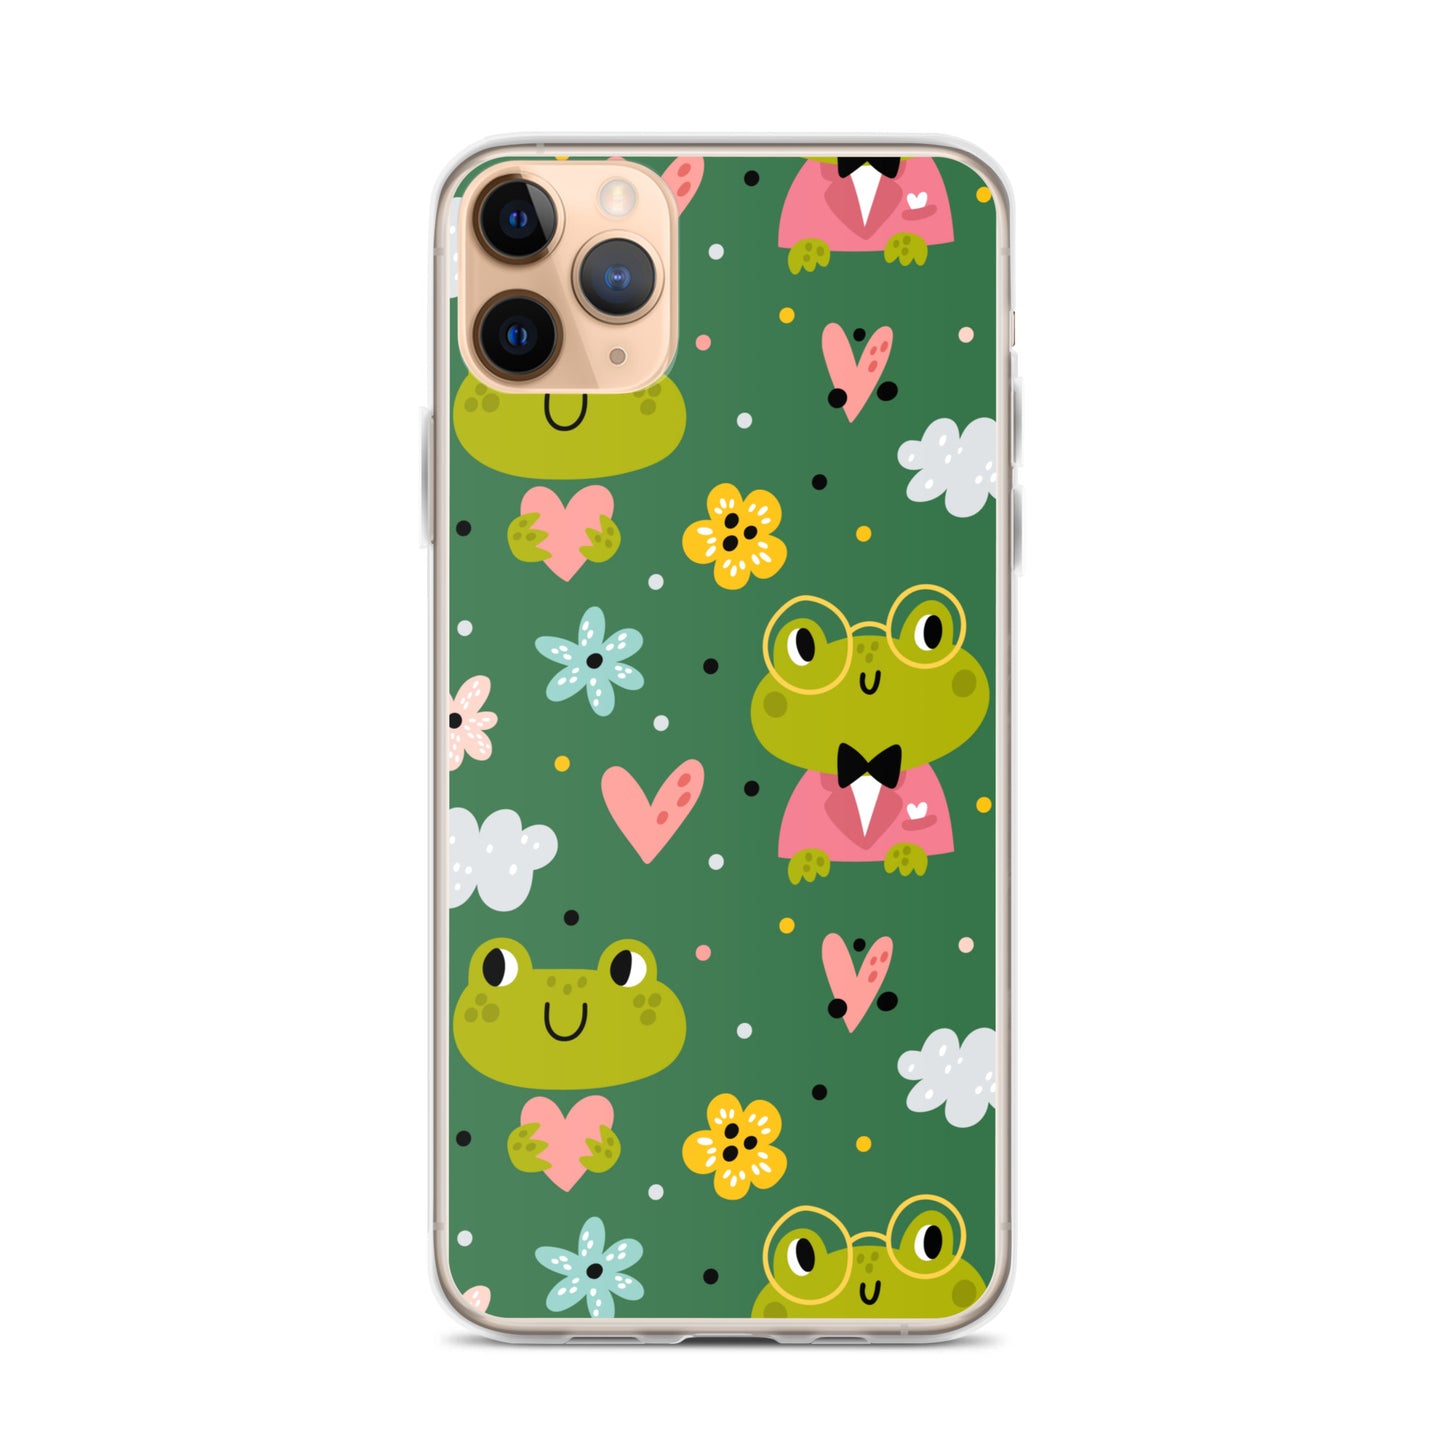 Frog Phone Case, iPhone 13 Pro Max Print Cute Kawaii Green Aesthetic iPhone 12 11 Mini SE XS Max XR X 8 7 Plus Cell Cover Starcove Fashion